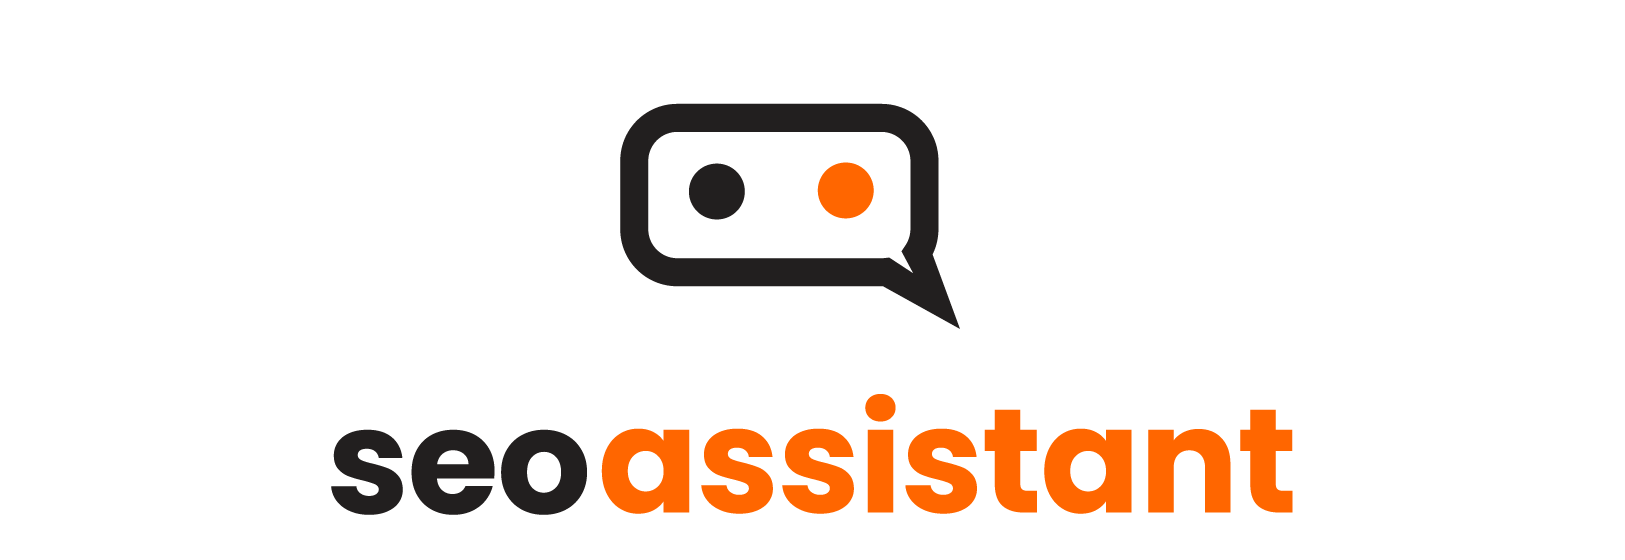 Our seo assistant logo